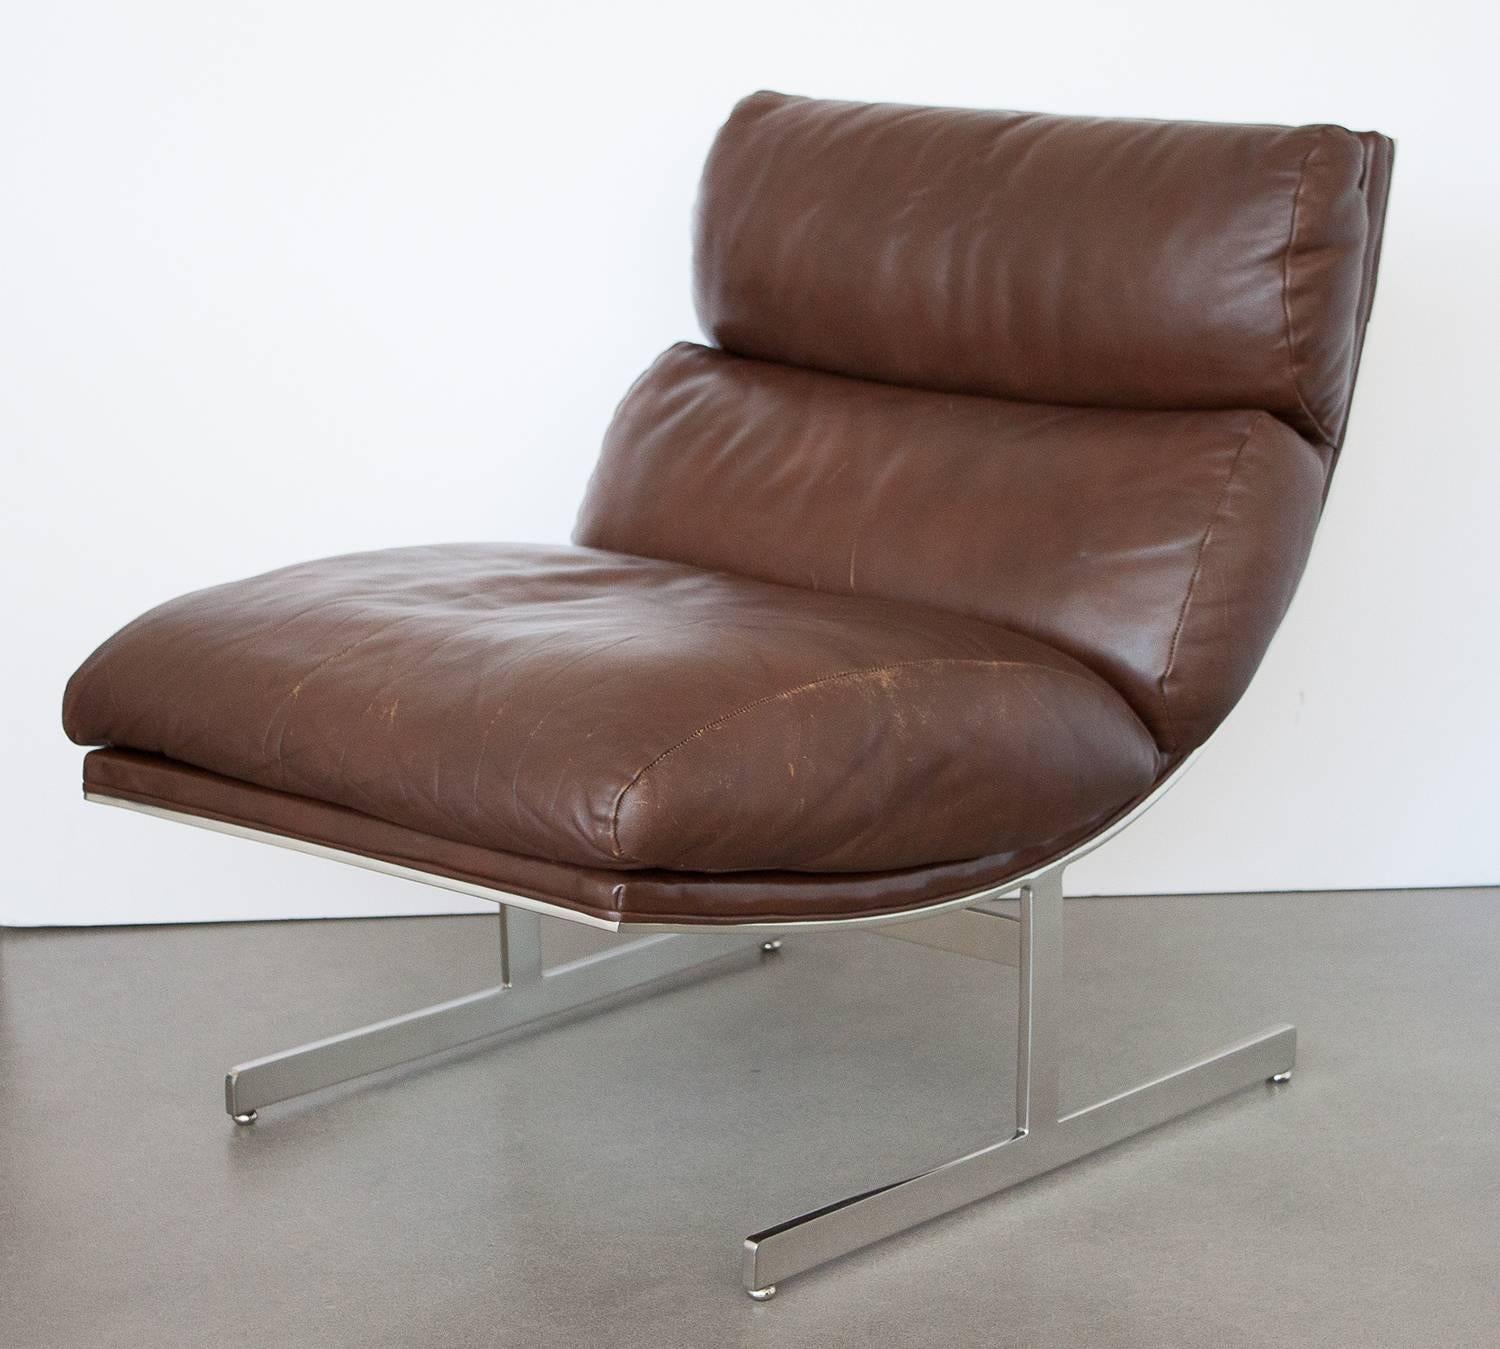 Polished Pair of Kipp Stewart Brown Leather Lounge Chairs for Directional